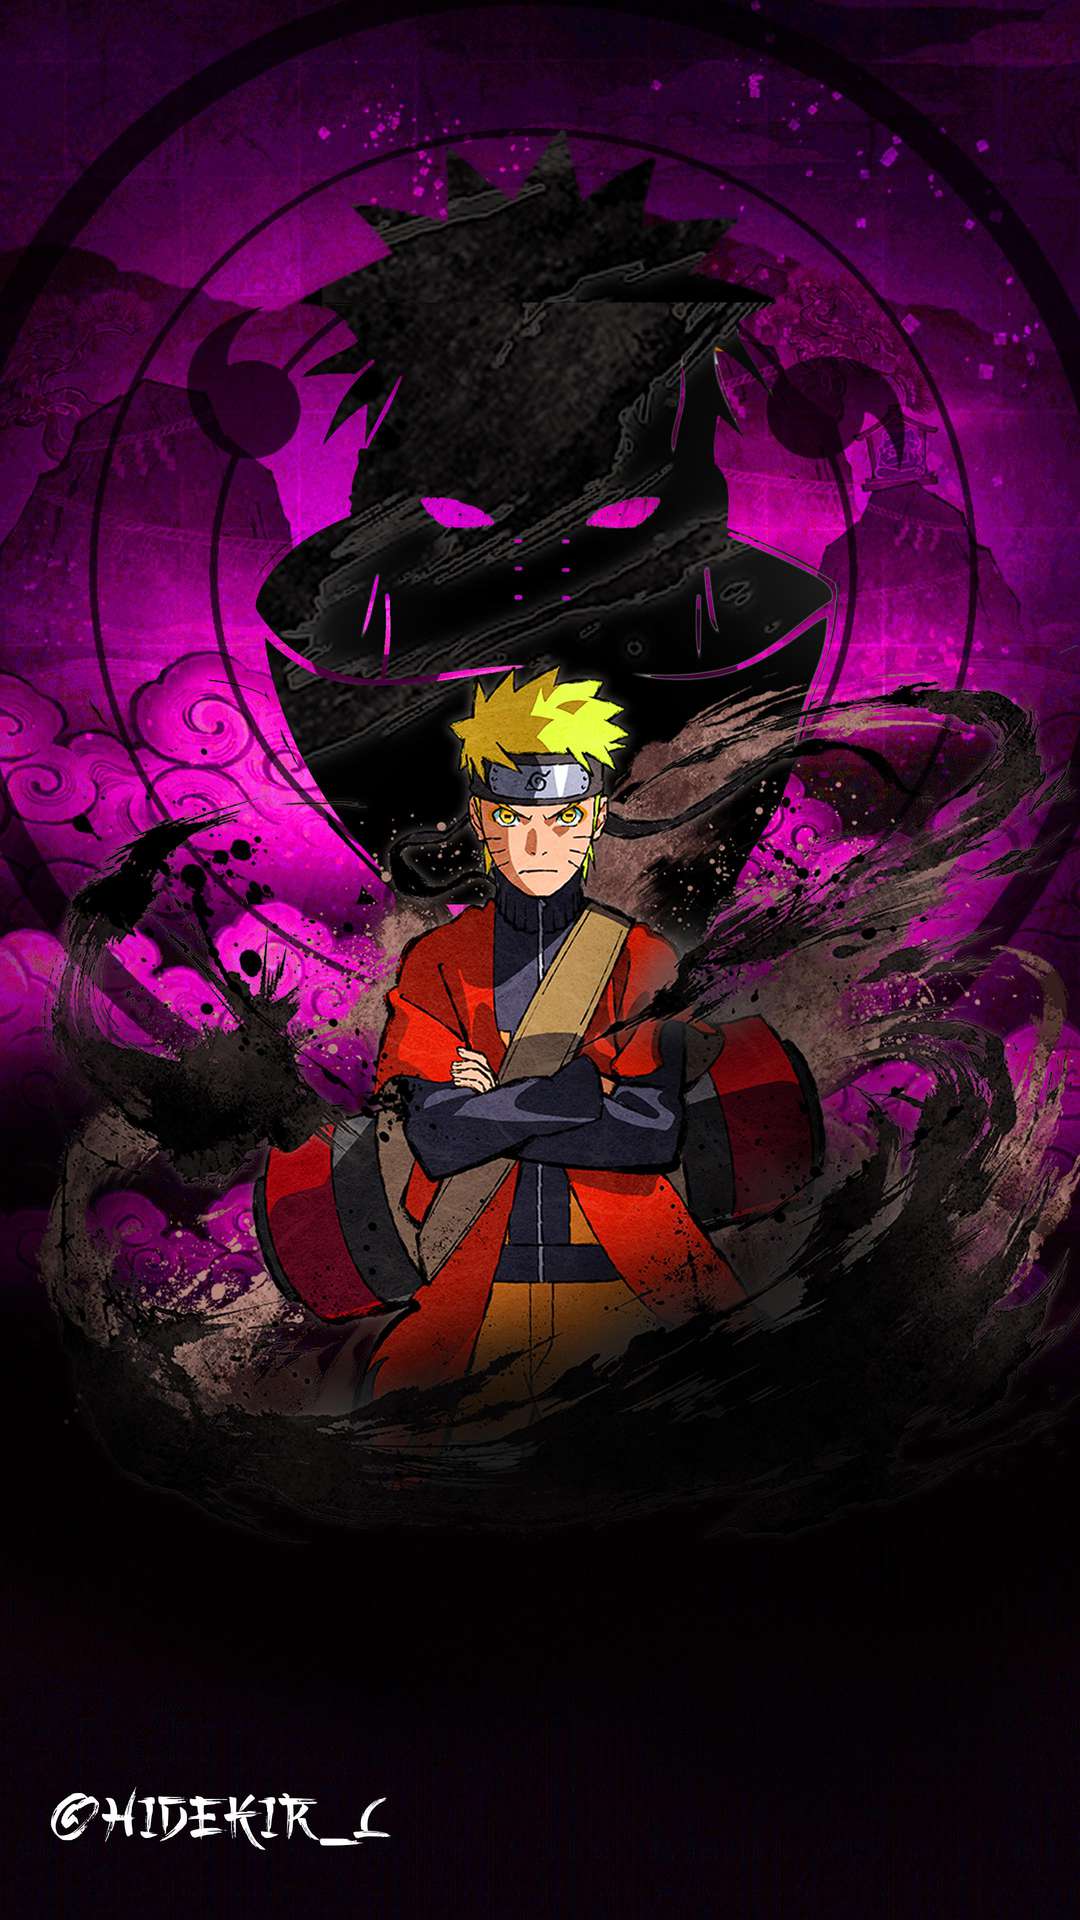 Naruto Pain iPhone Wallpapers Top 25 Best Naruto Pain iPhone Wallpapers   Getty Wallpapers